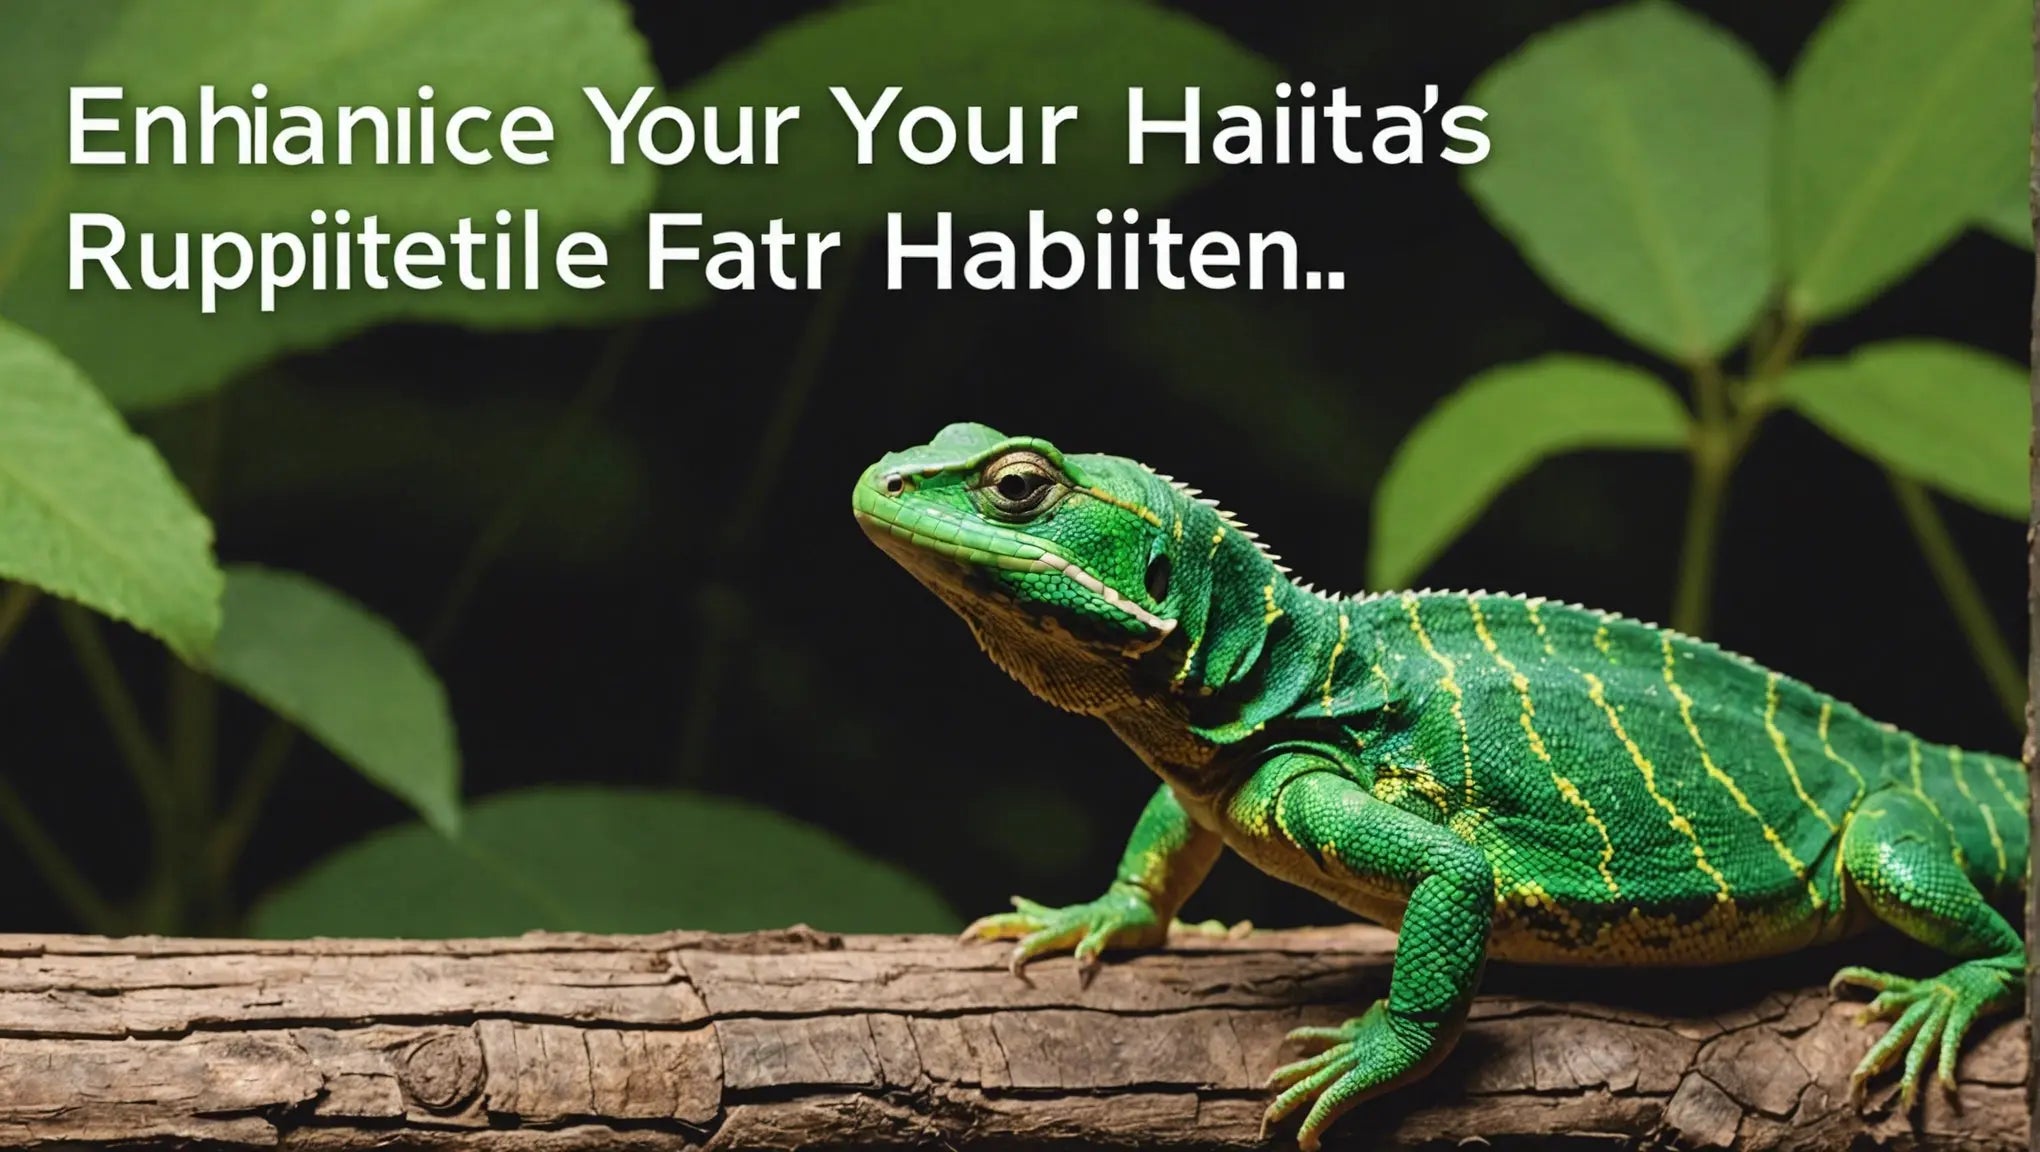 Enhance Your Reptile's Habitat with High-Quality Reptile Heat Emitters